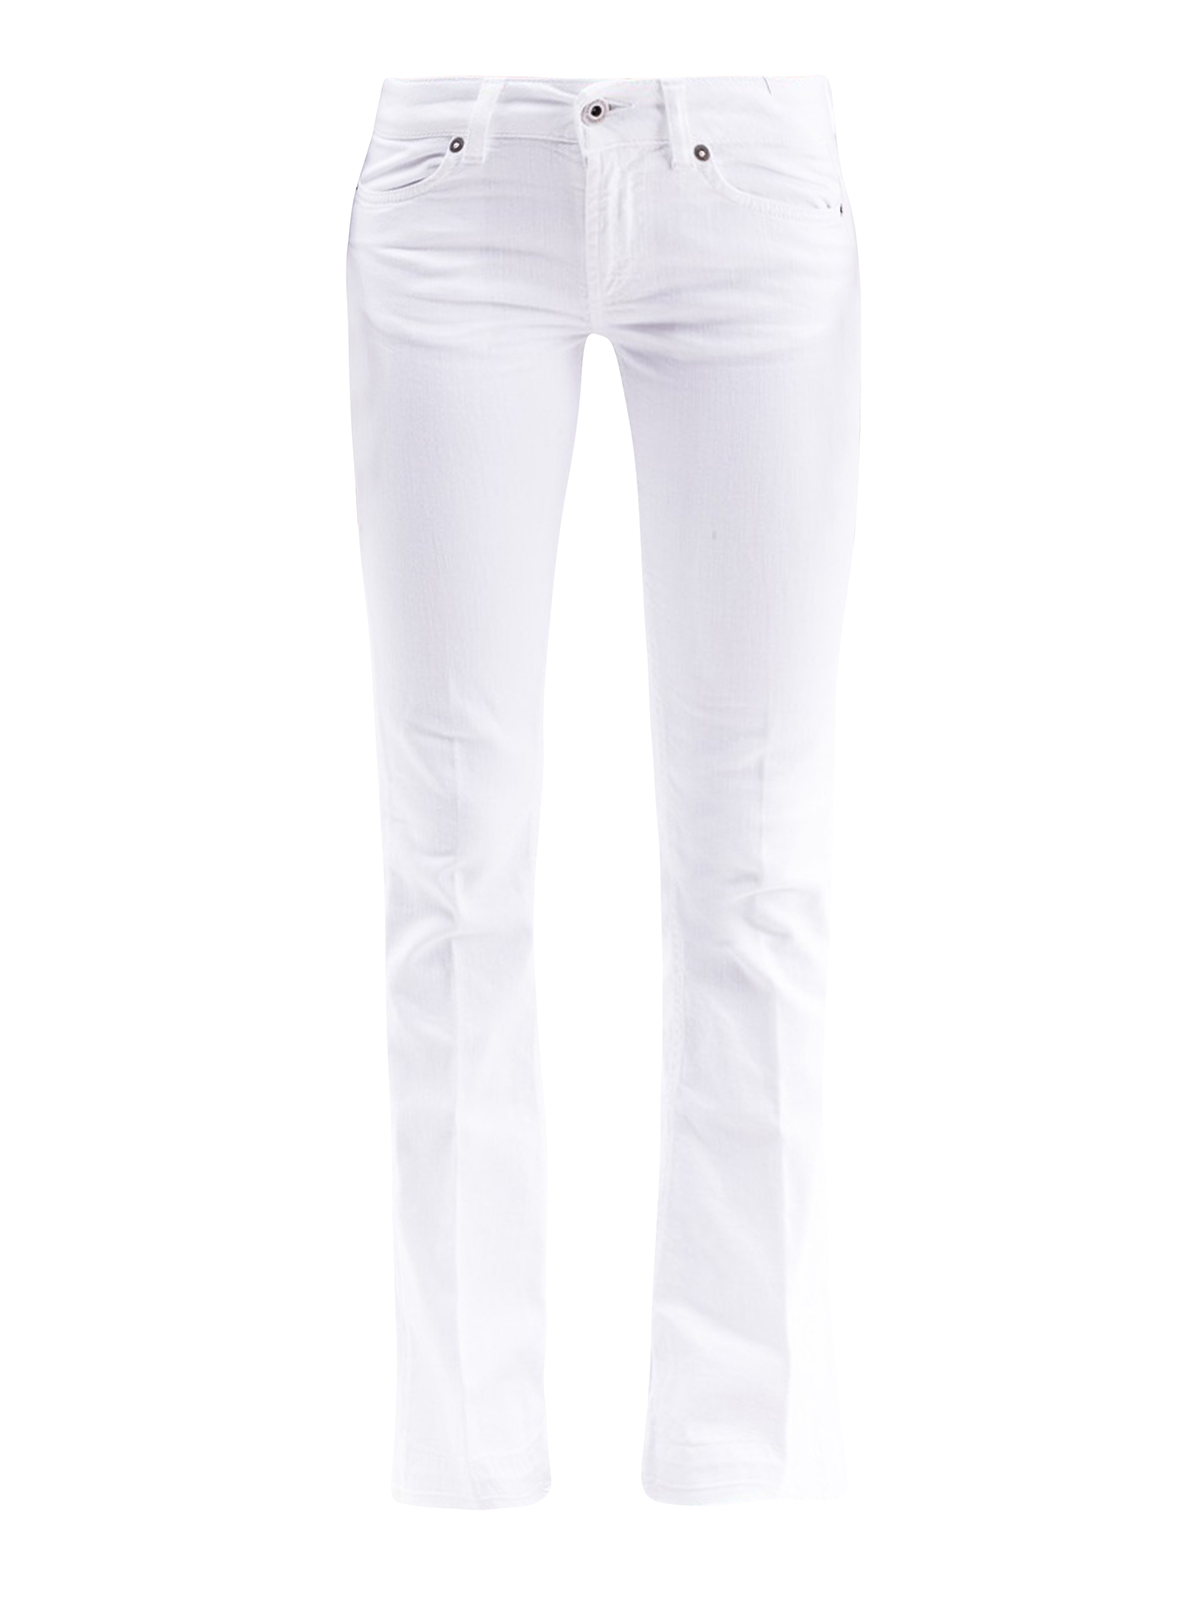 Bootcut jeans Dondup - Neon white jeans - DP126BSE027PTD000 | iKRIX.com